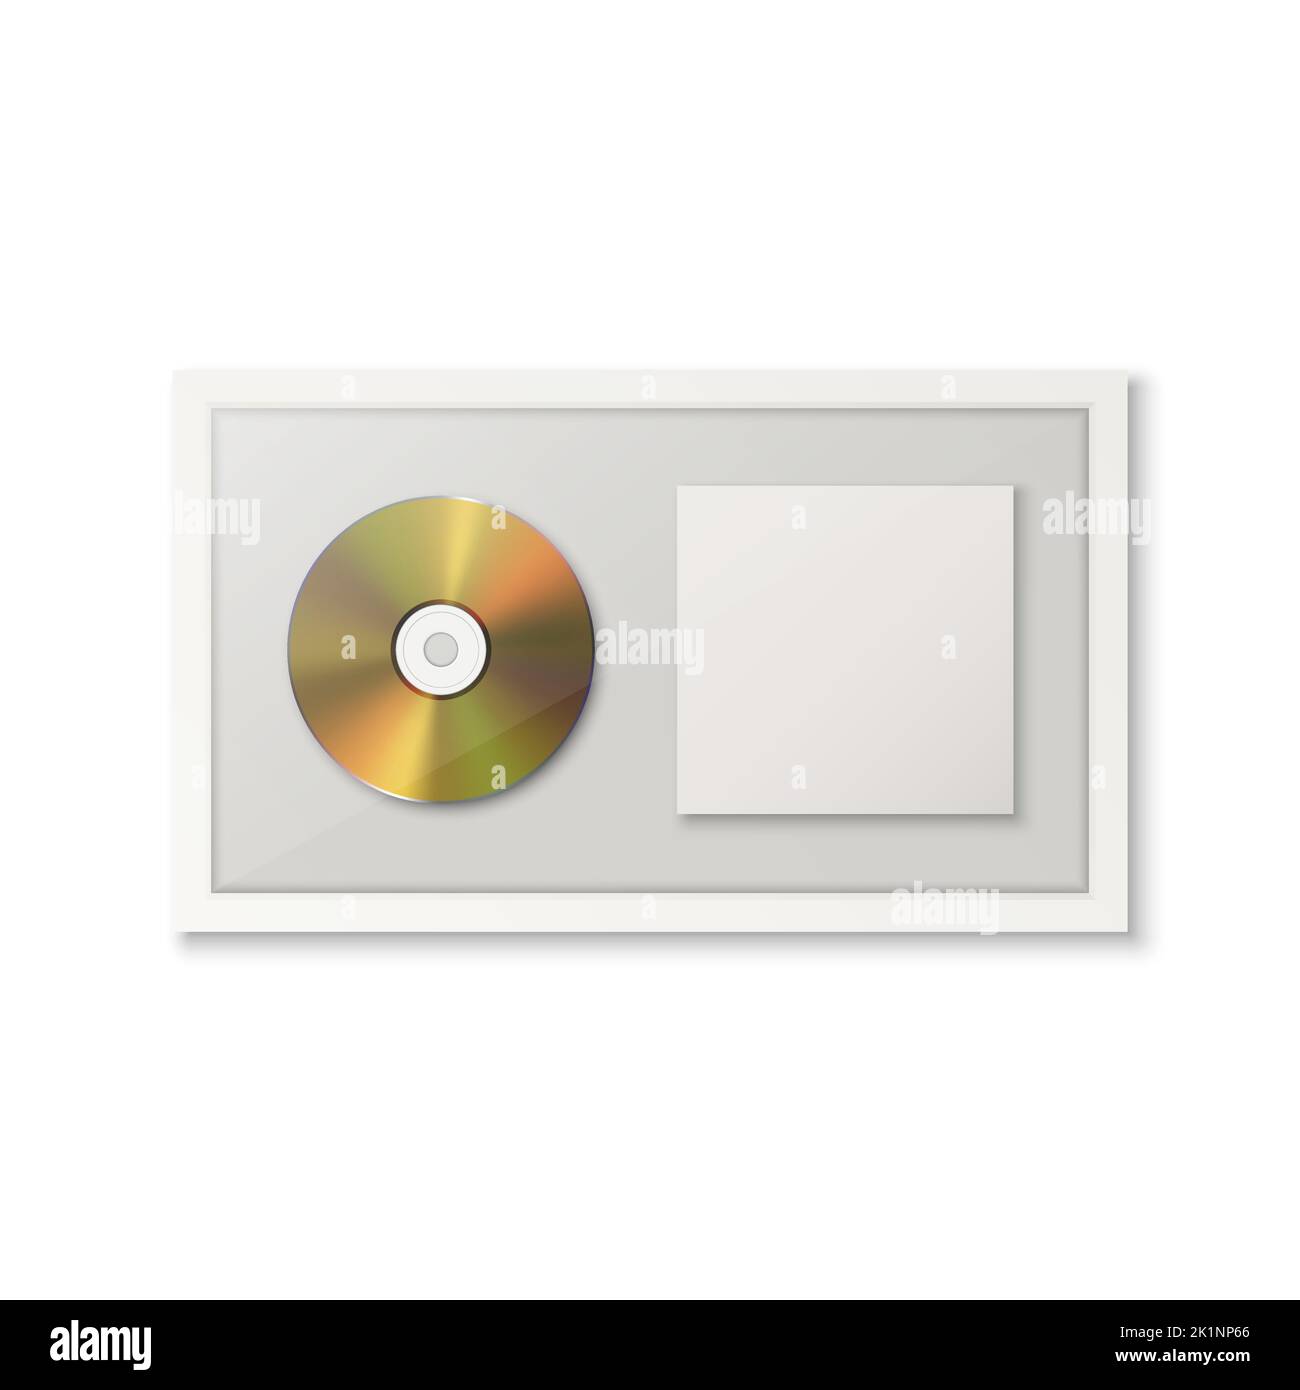 Realistic Vector 3d Yellow Golden CD, Packaging, Cover with White Frame Isolated on White Background. Single Album Compact Disc Award, Limited Edition Stock Vector